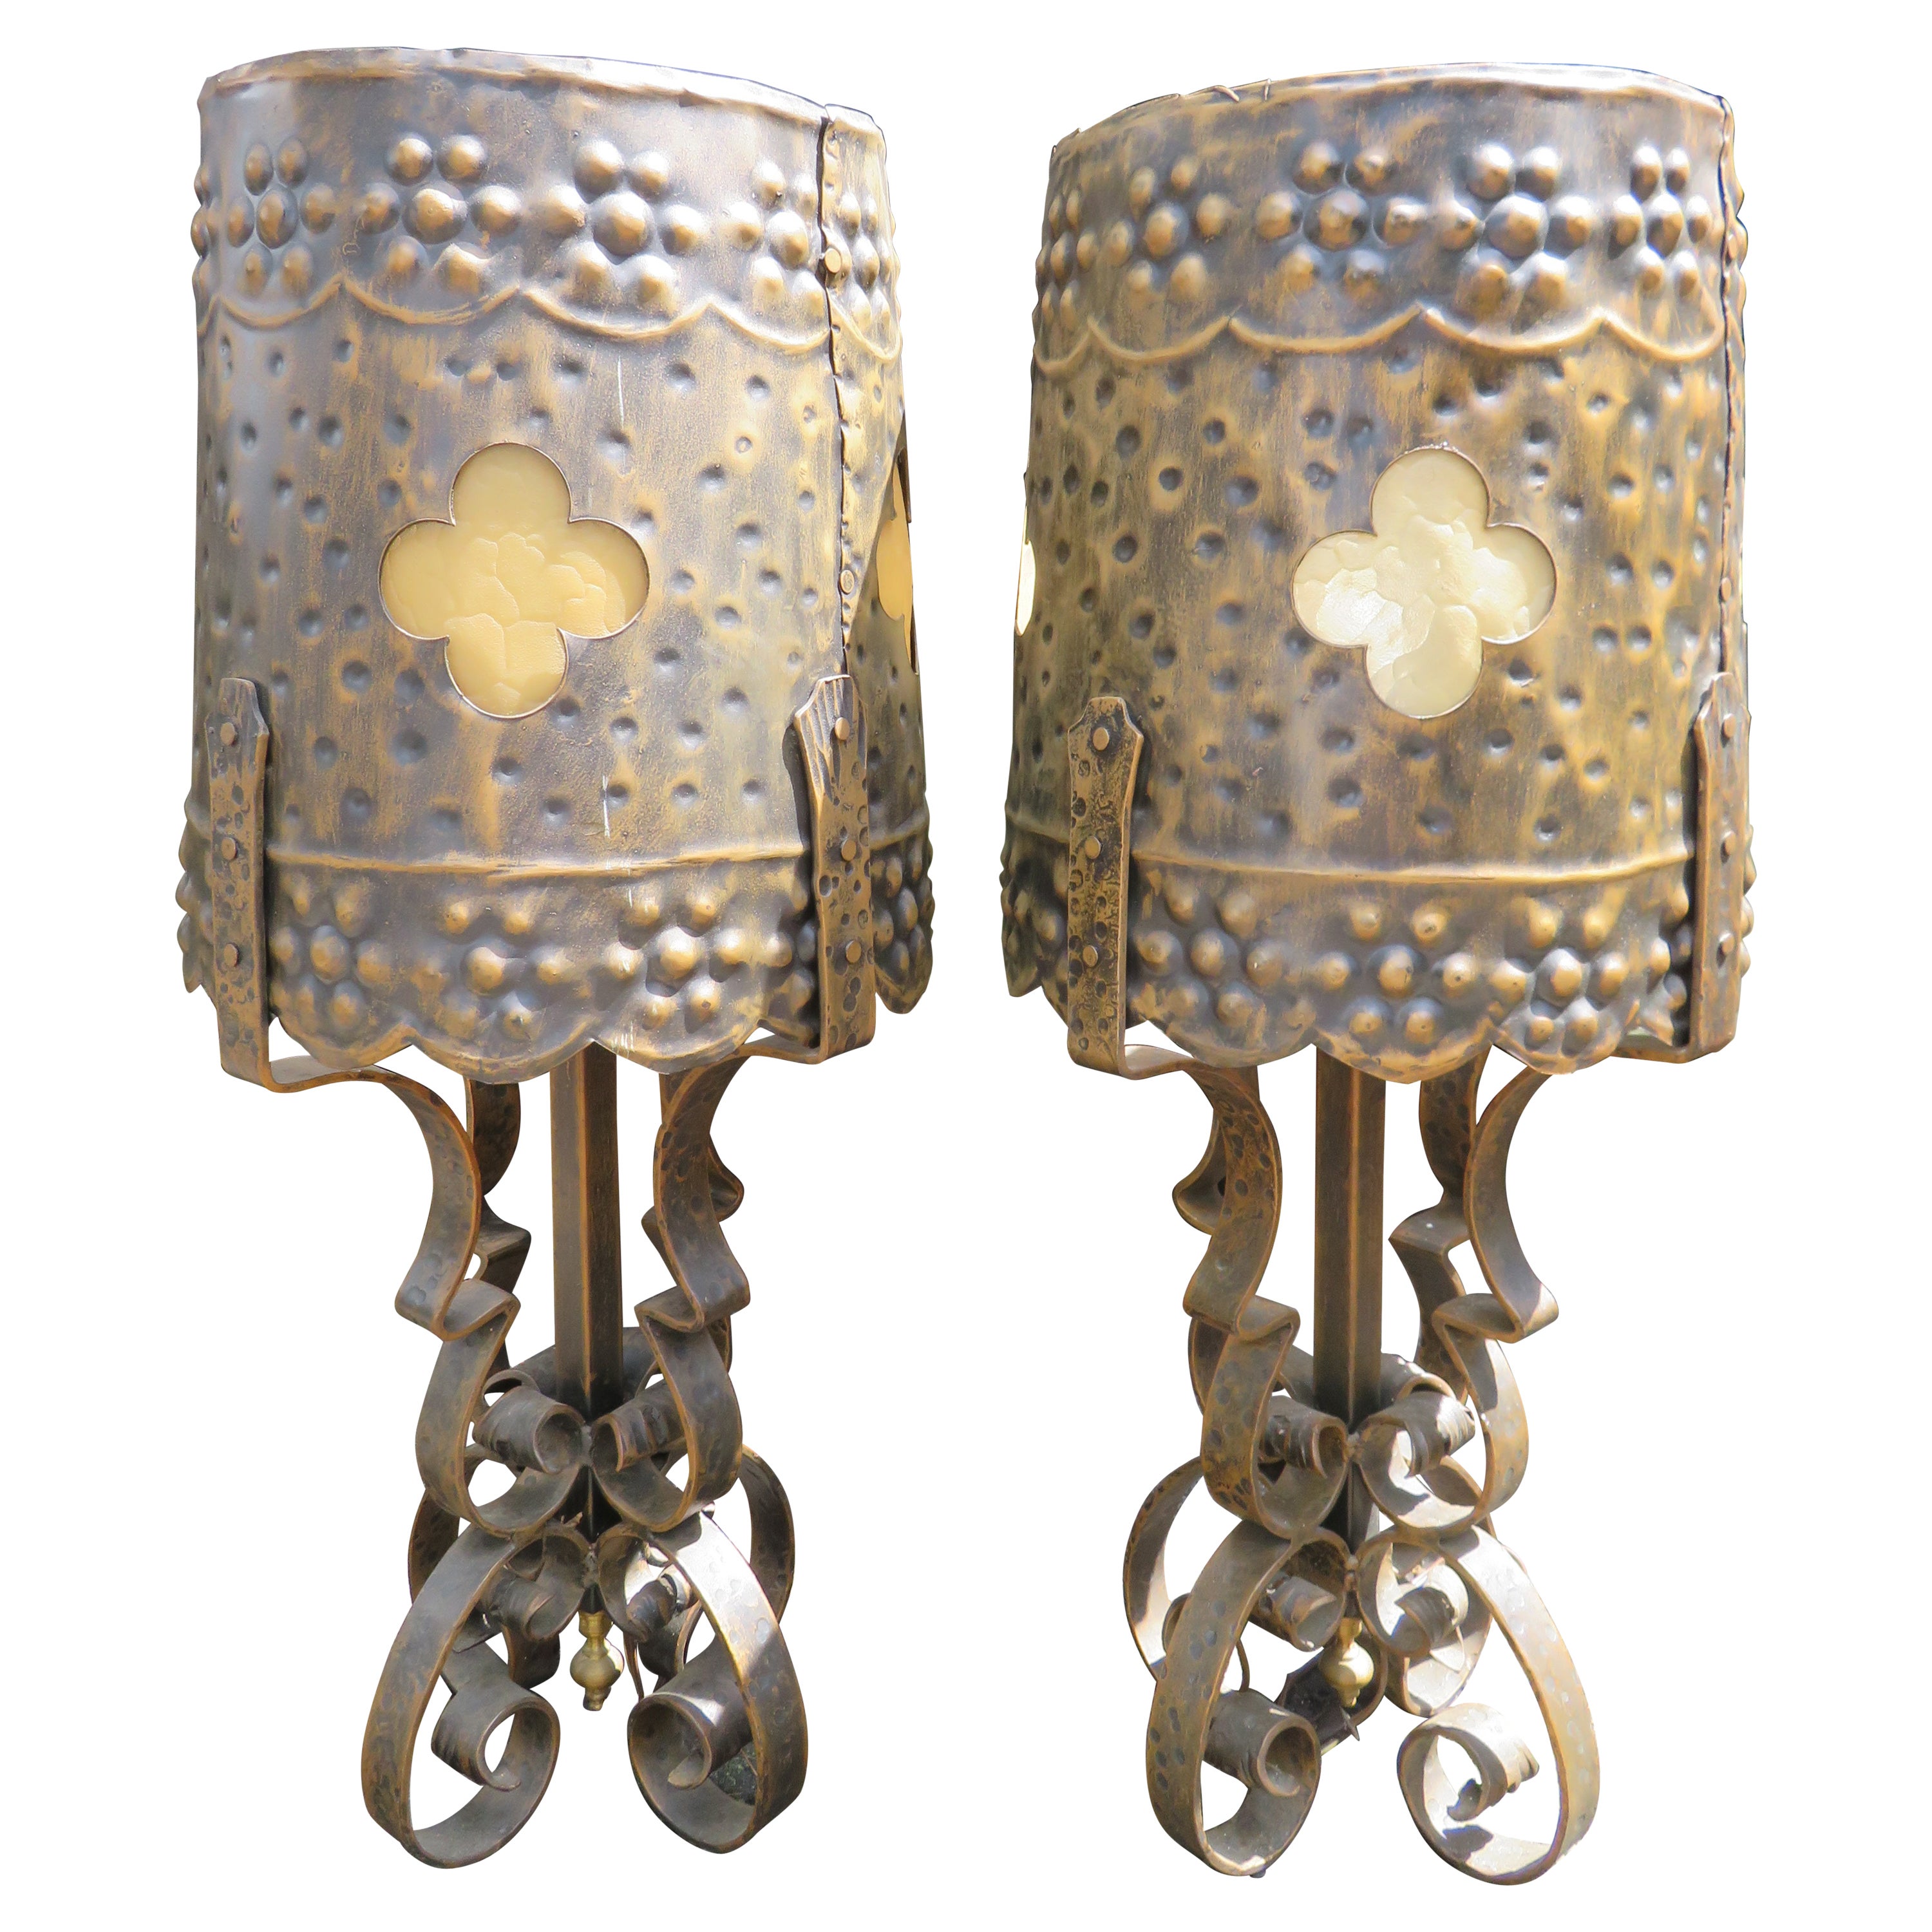 Monumental Brutalist Hammered Tudor Gothic Scroll Lamps Mid-Century Modern For Sale